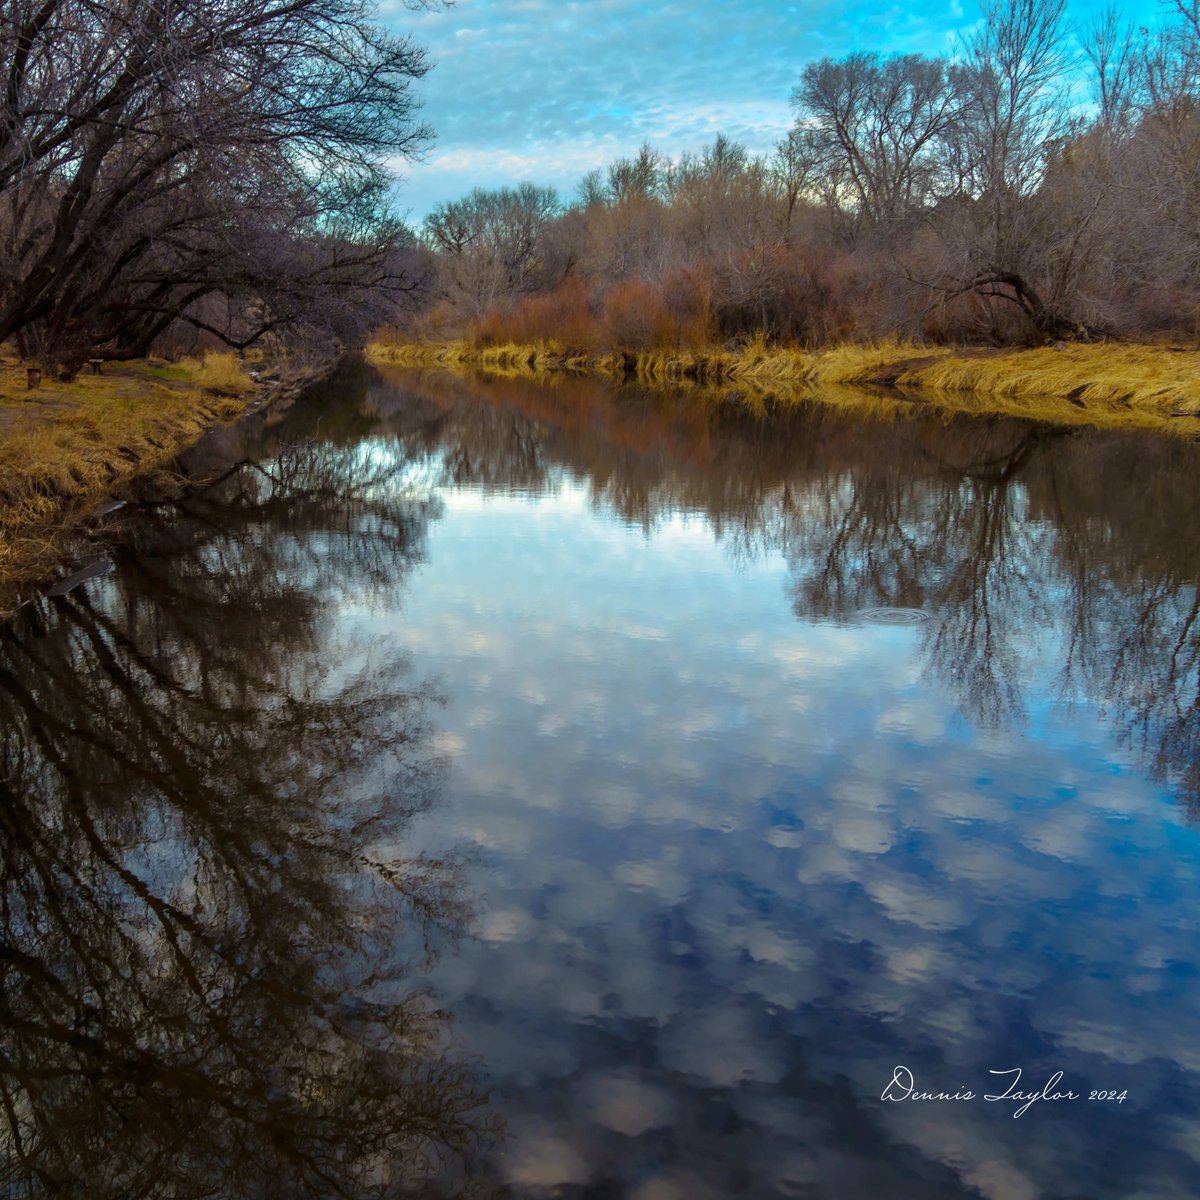 A pretty nice view from the banks of the #pecosriver in #pecosnewmexico #thingstosee #riverpictures #newmexico #nmdrive